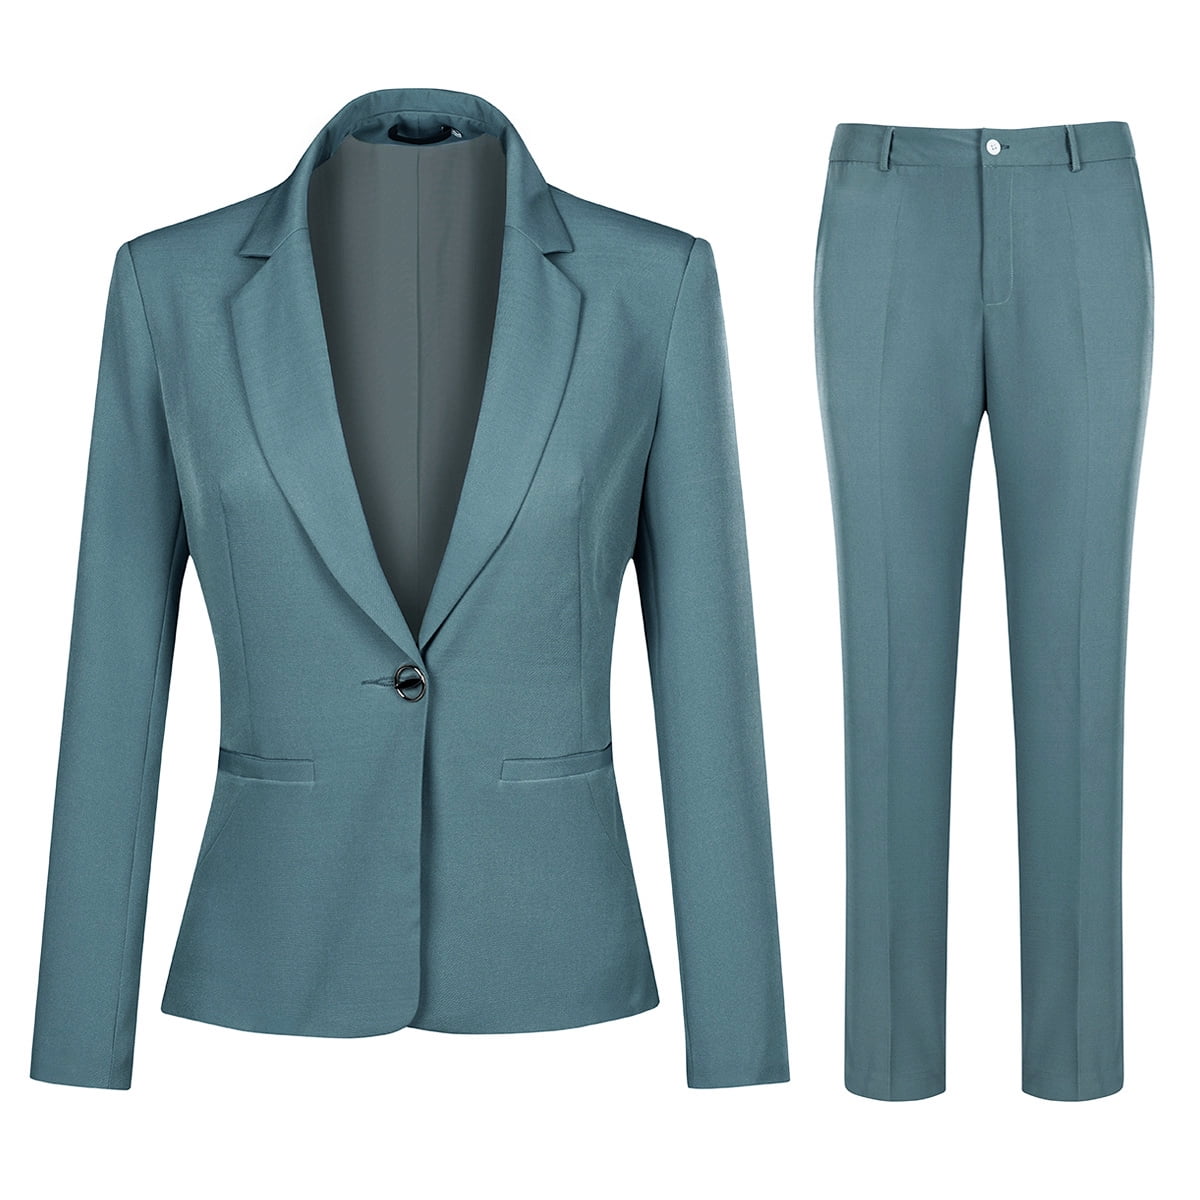 Youthup Women's Business 1 Button 2 Pcs Suit for Work Career - Walmart.com